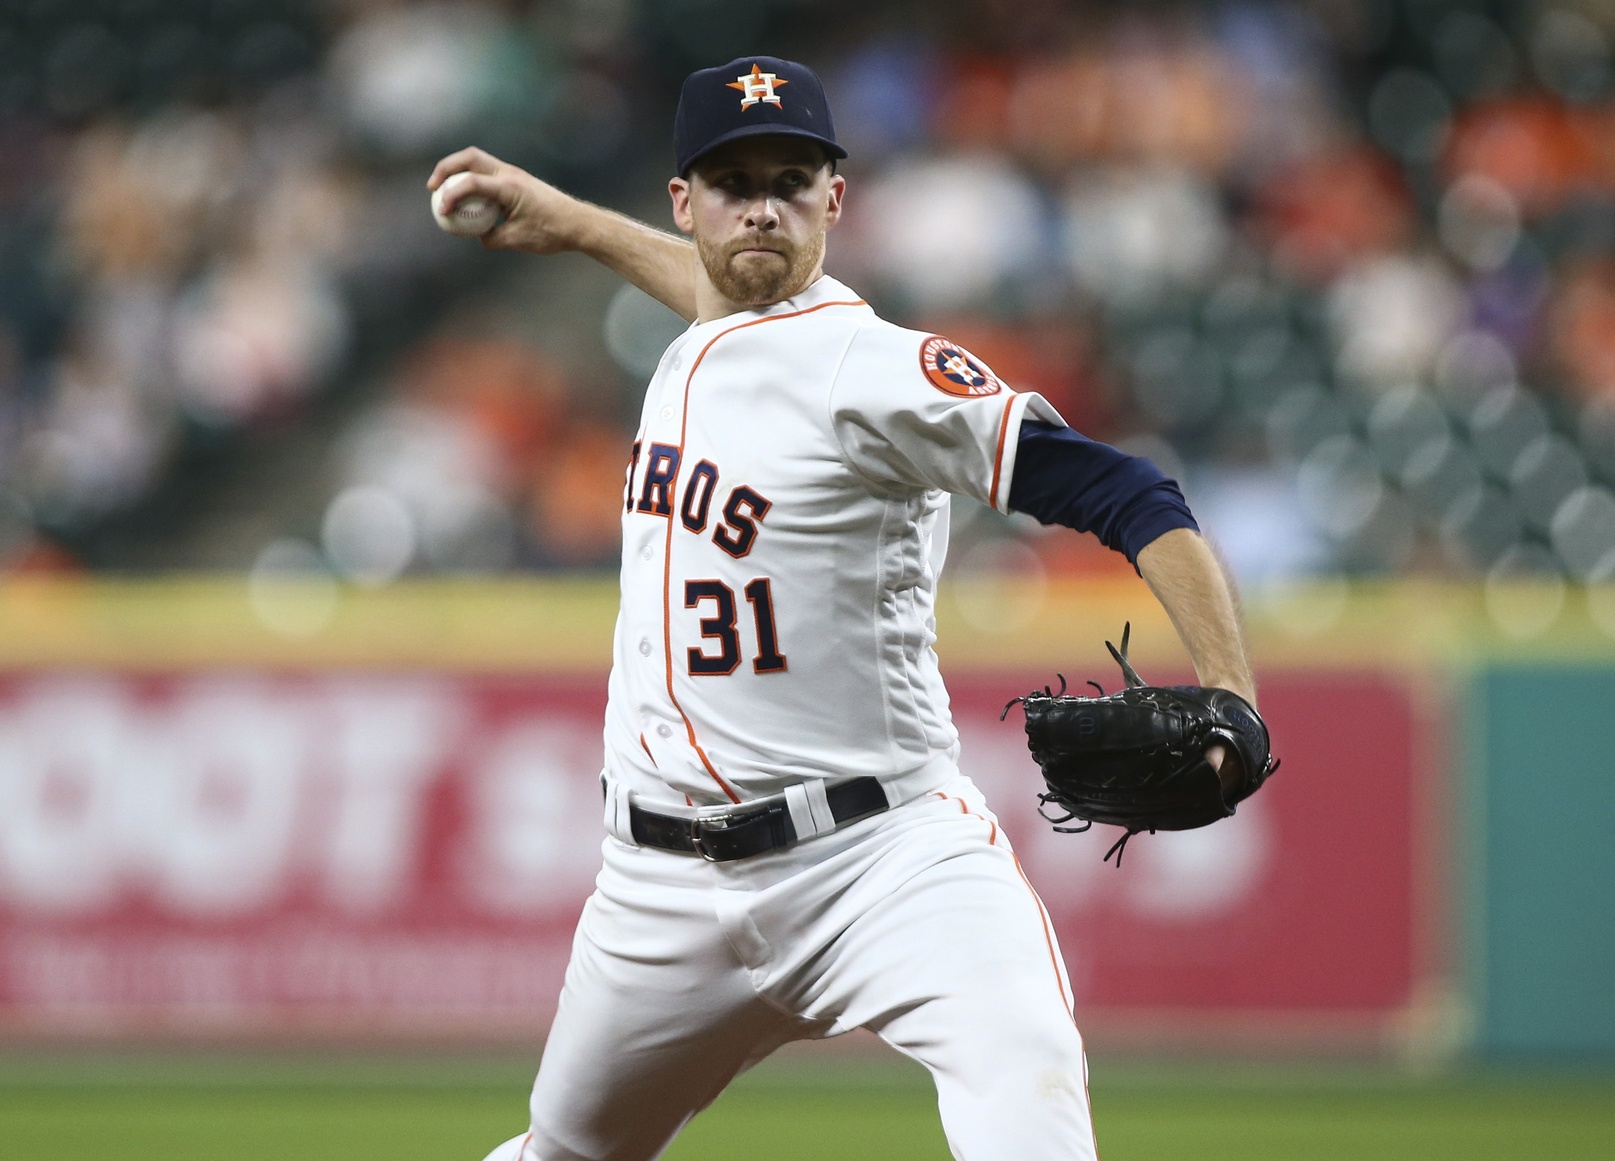 Sep 26, 2016; Houston, TX, USA; Houston Astros starting pitcher Collin McHugh (31) delivers a pitch during the first inning against the Seattle Mariners at Minute Maid Park. Mandatory Credit: Troy Taormina-USA TODAY Sports